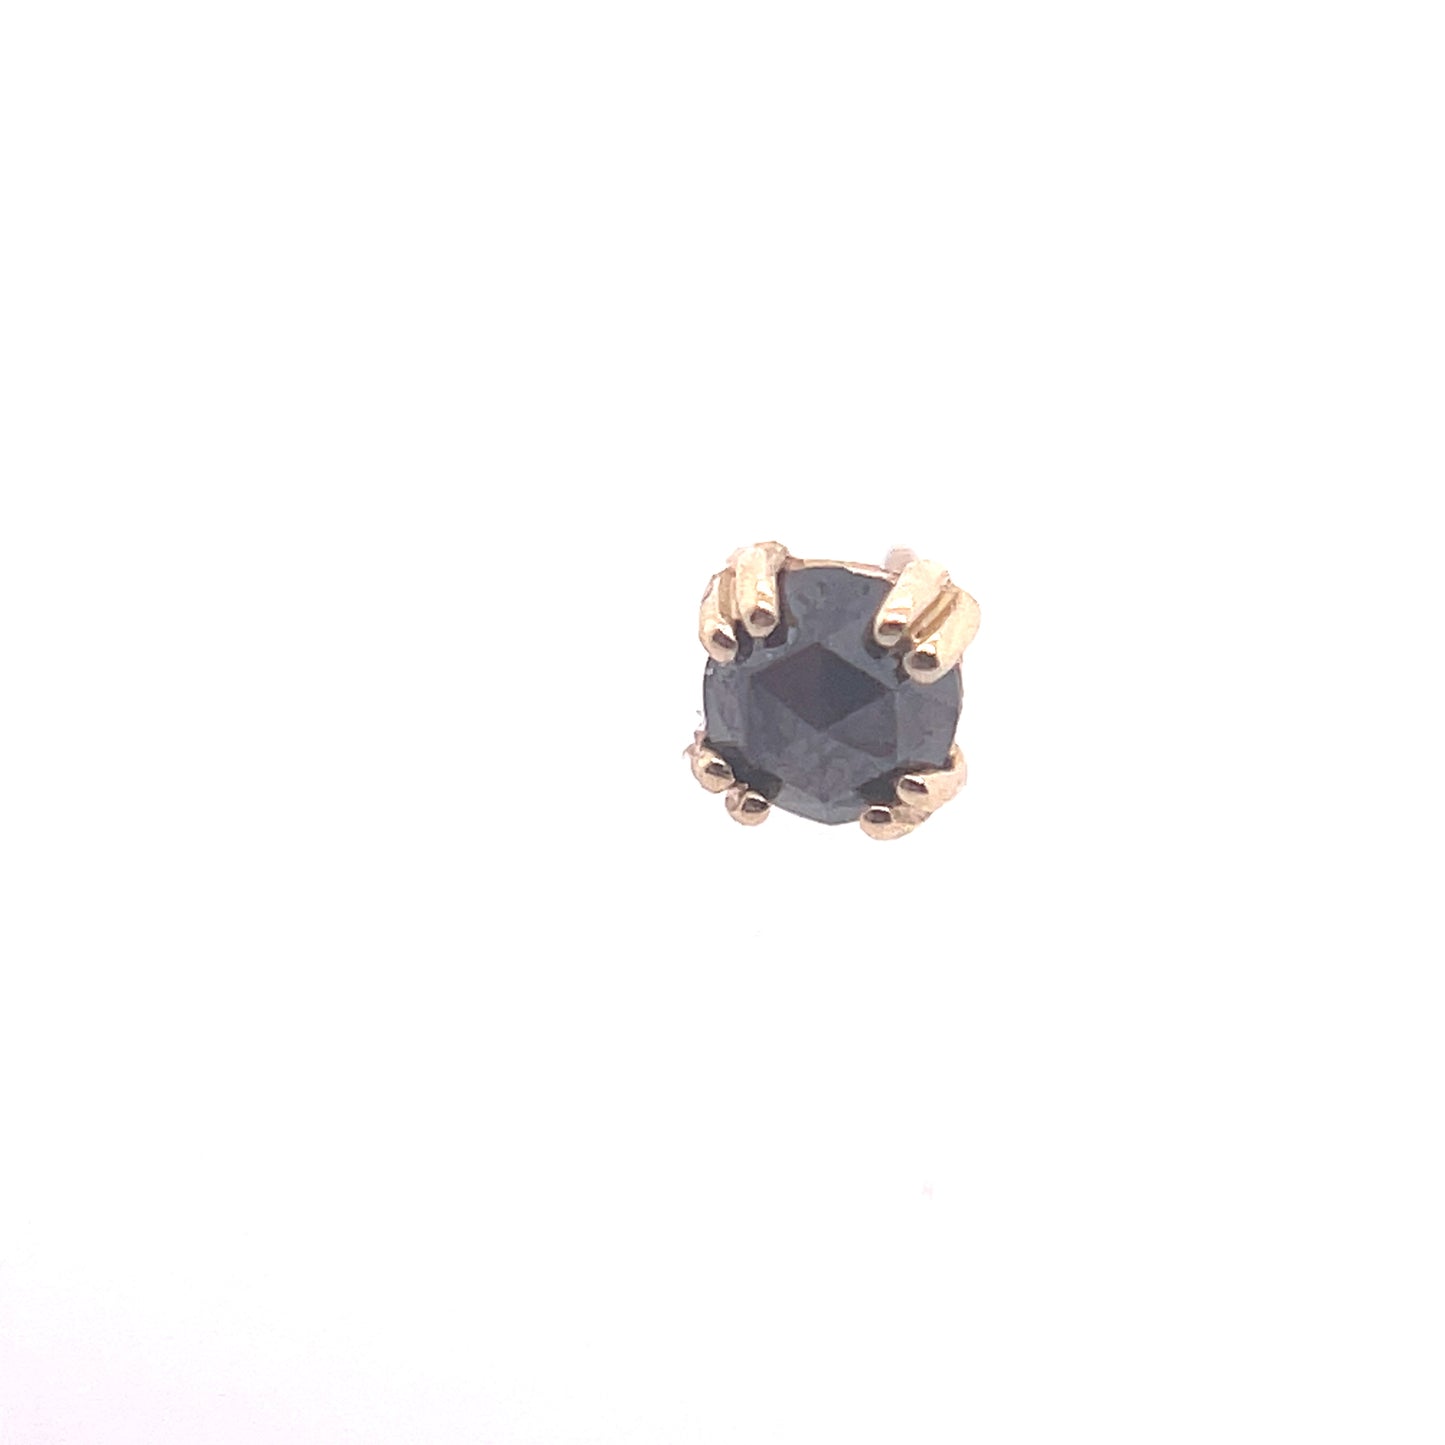 3mm Round Cab Prong